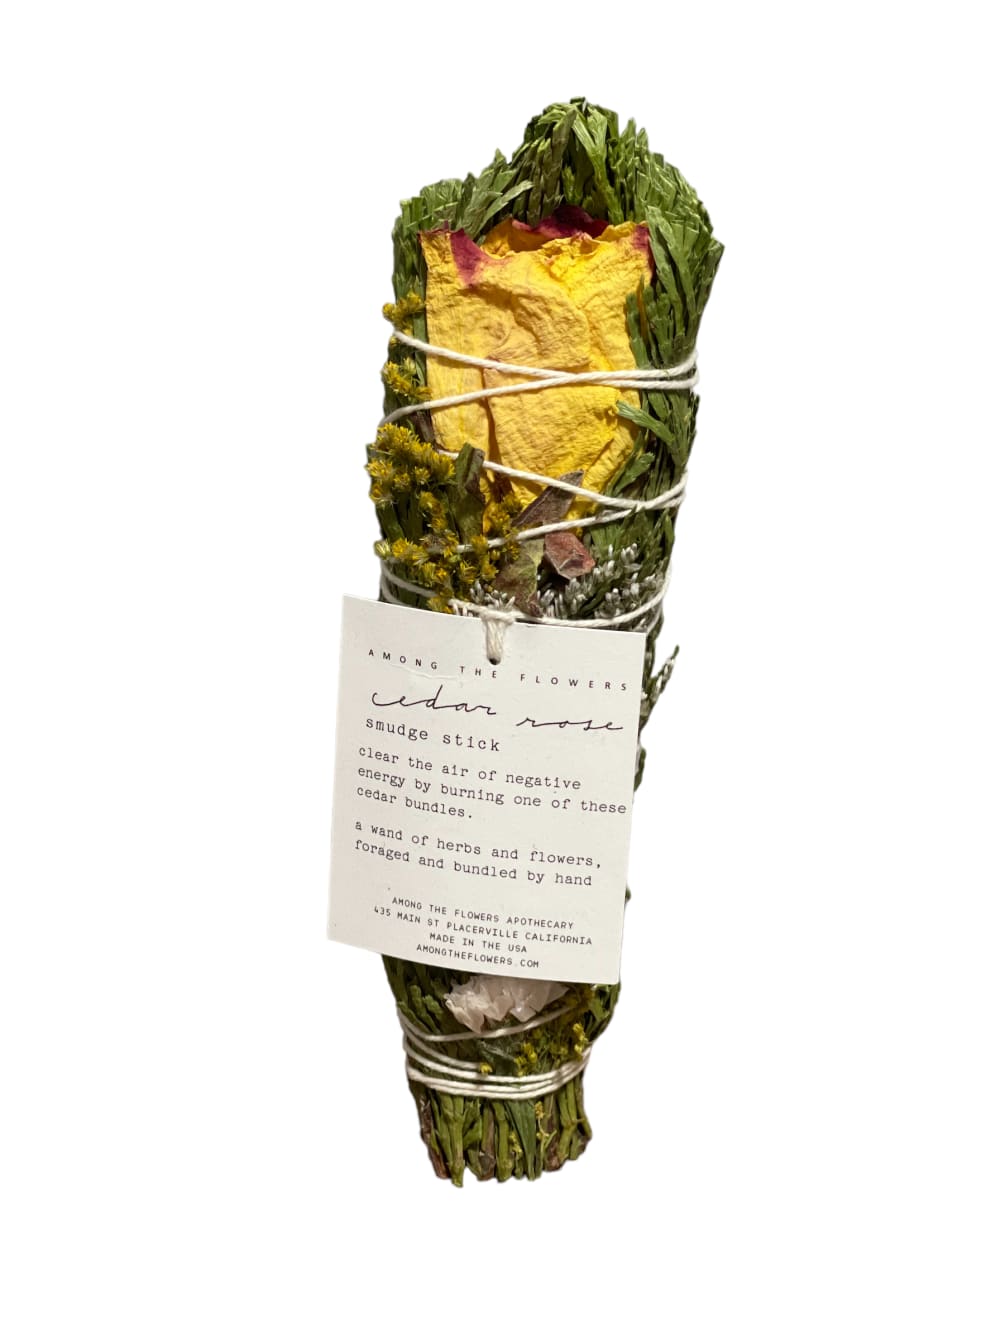 A bouquet of dried herbs and flowers, hand-bound with love out of